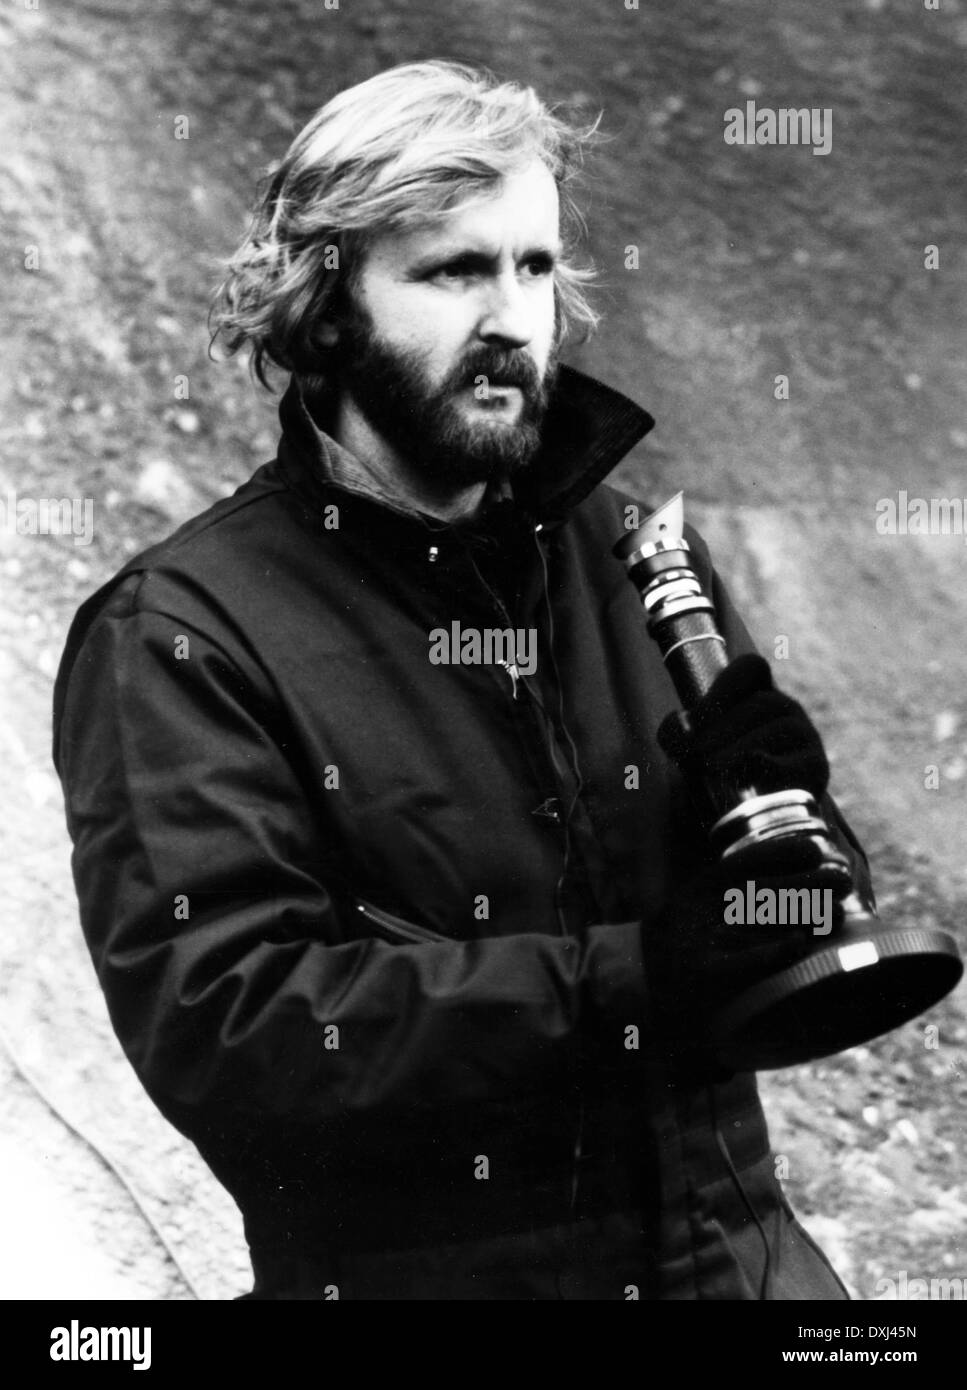 Into the abyss james cameron Black and White Stock Photos & Images - Alamy